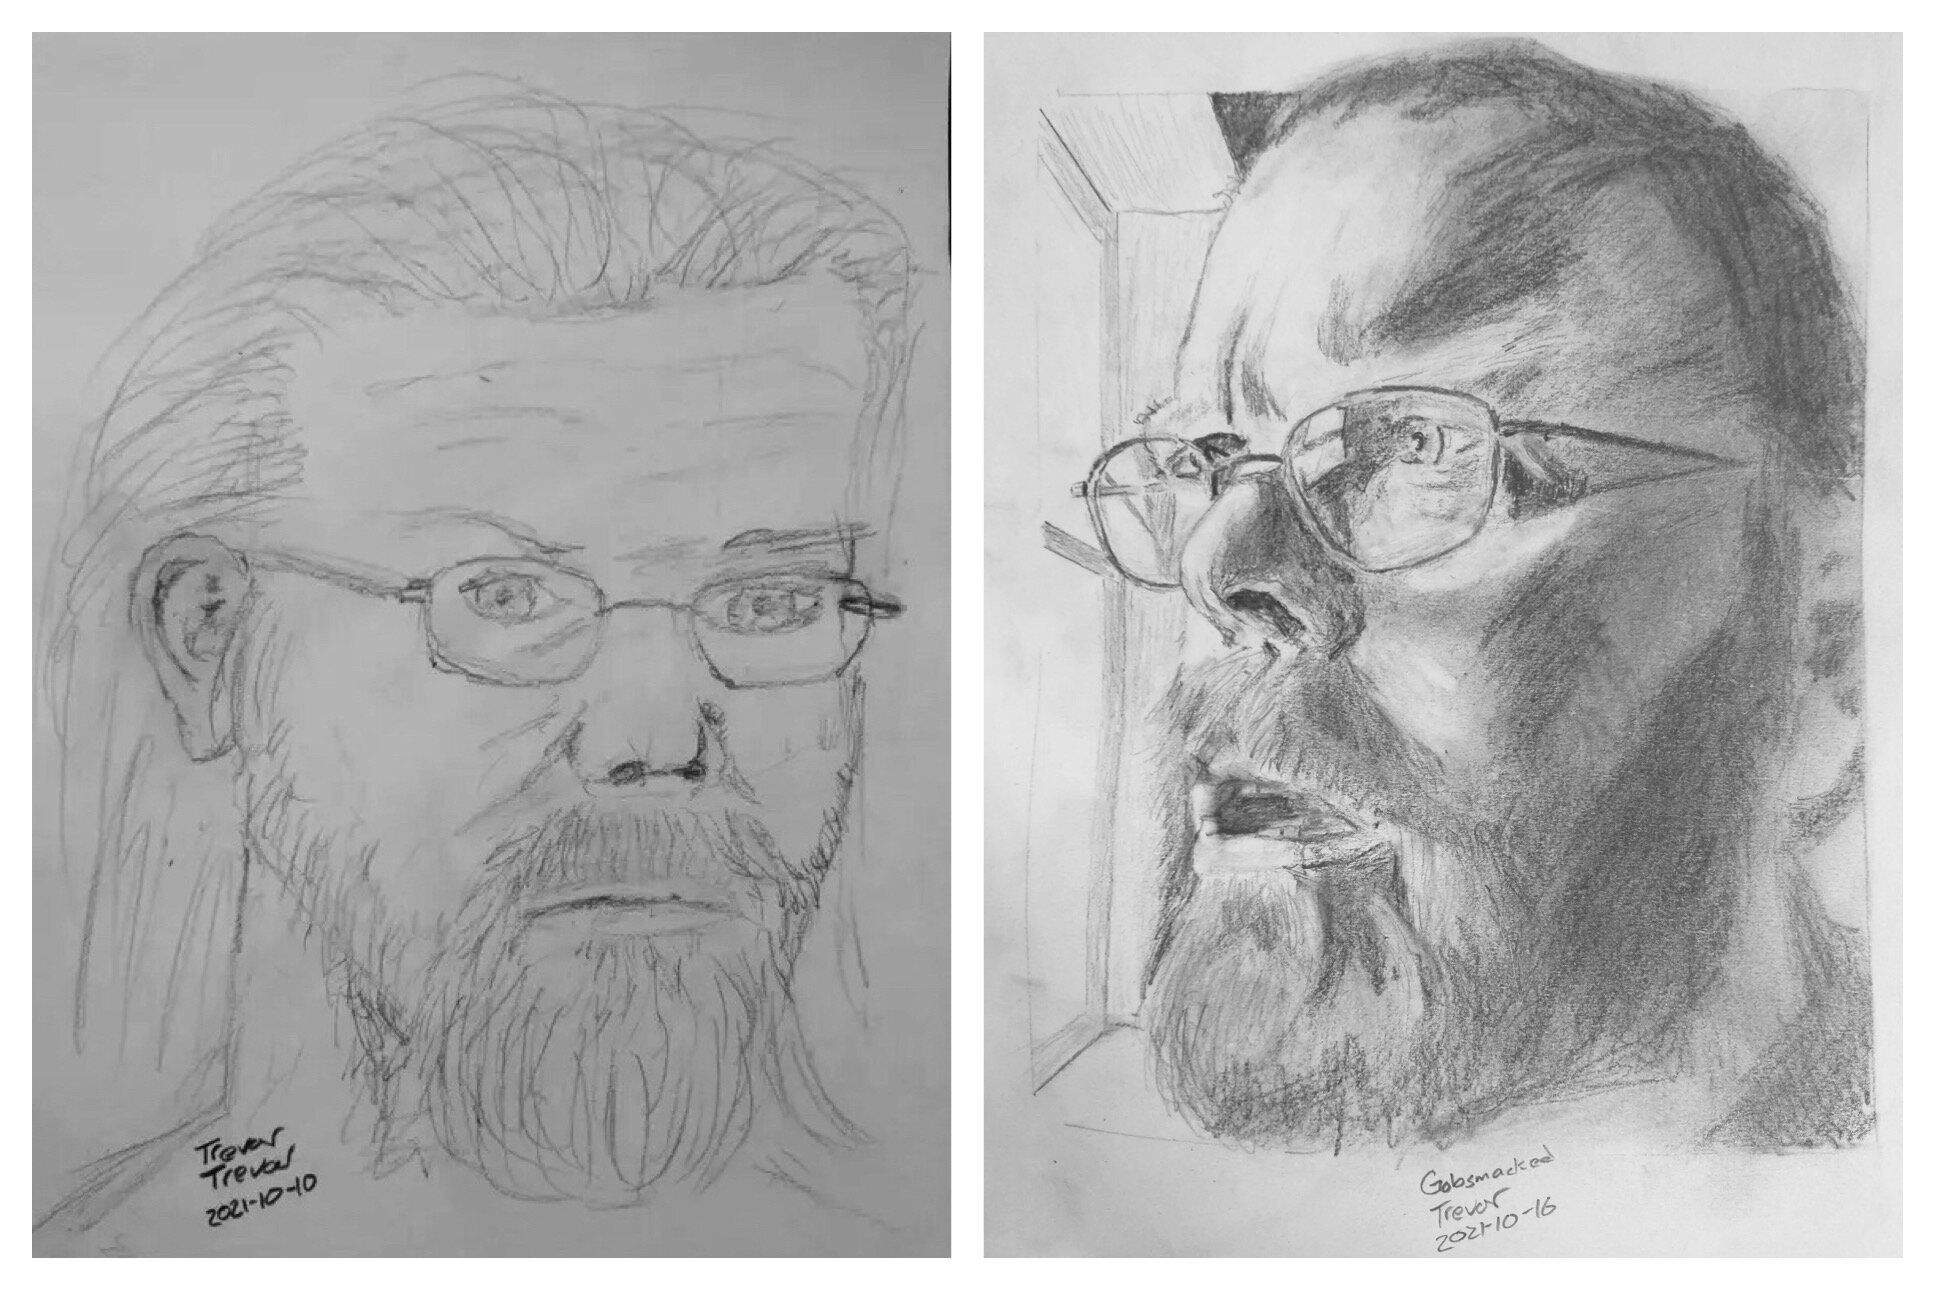 Trevor's Before and After Self Portrait Drawings Oct 11-6, 2021